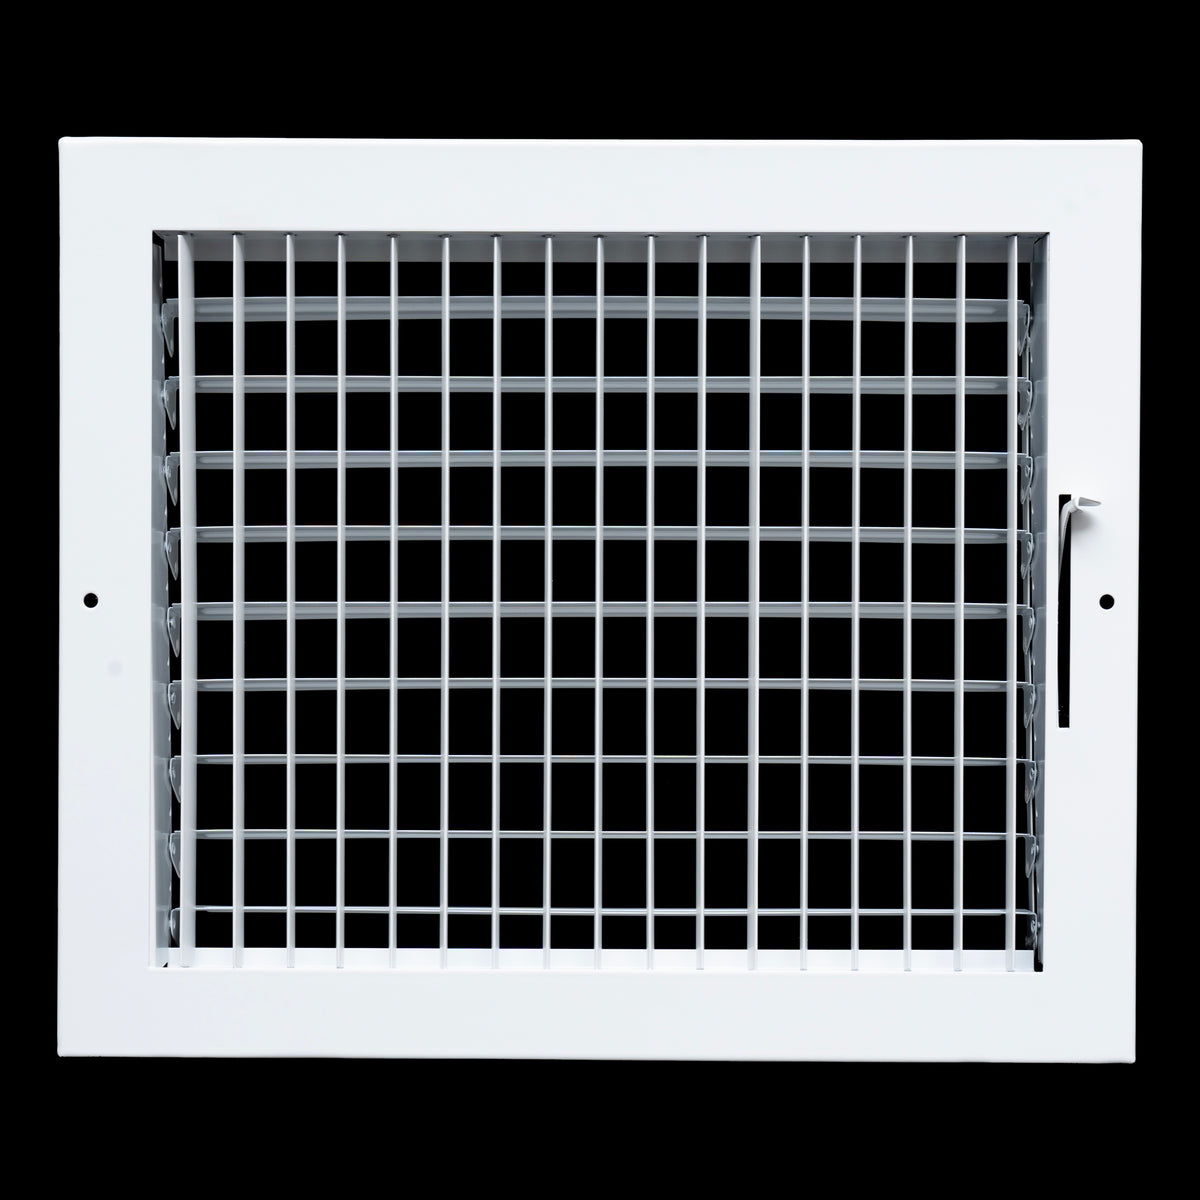 airgrilles 12x10 steel adjustable air supply grille register vent cover grill for sidewall and ceiling White  Outer Dimensions: 13.75"W X 11.75"H for 12x10 Duct Opening